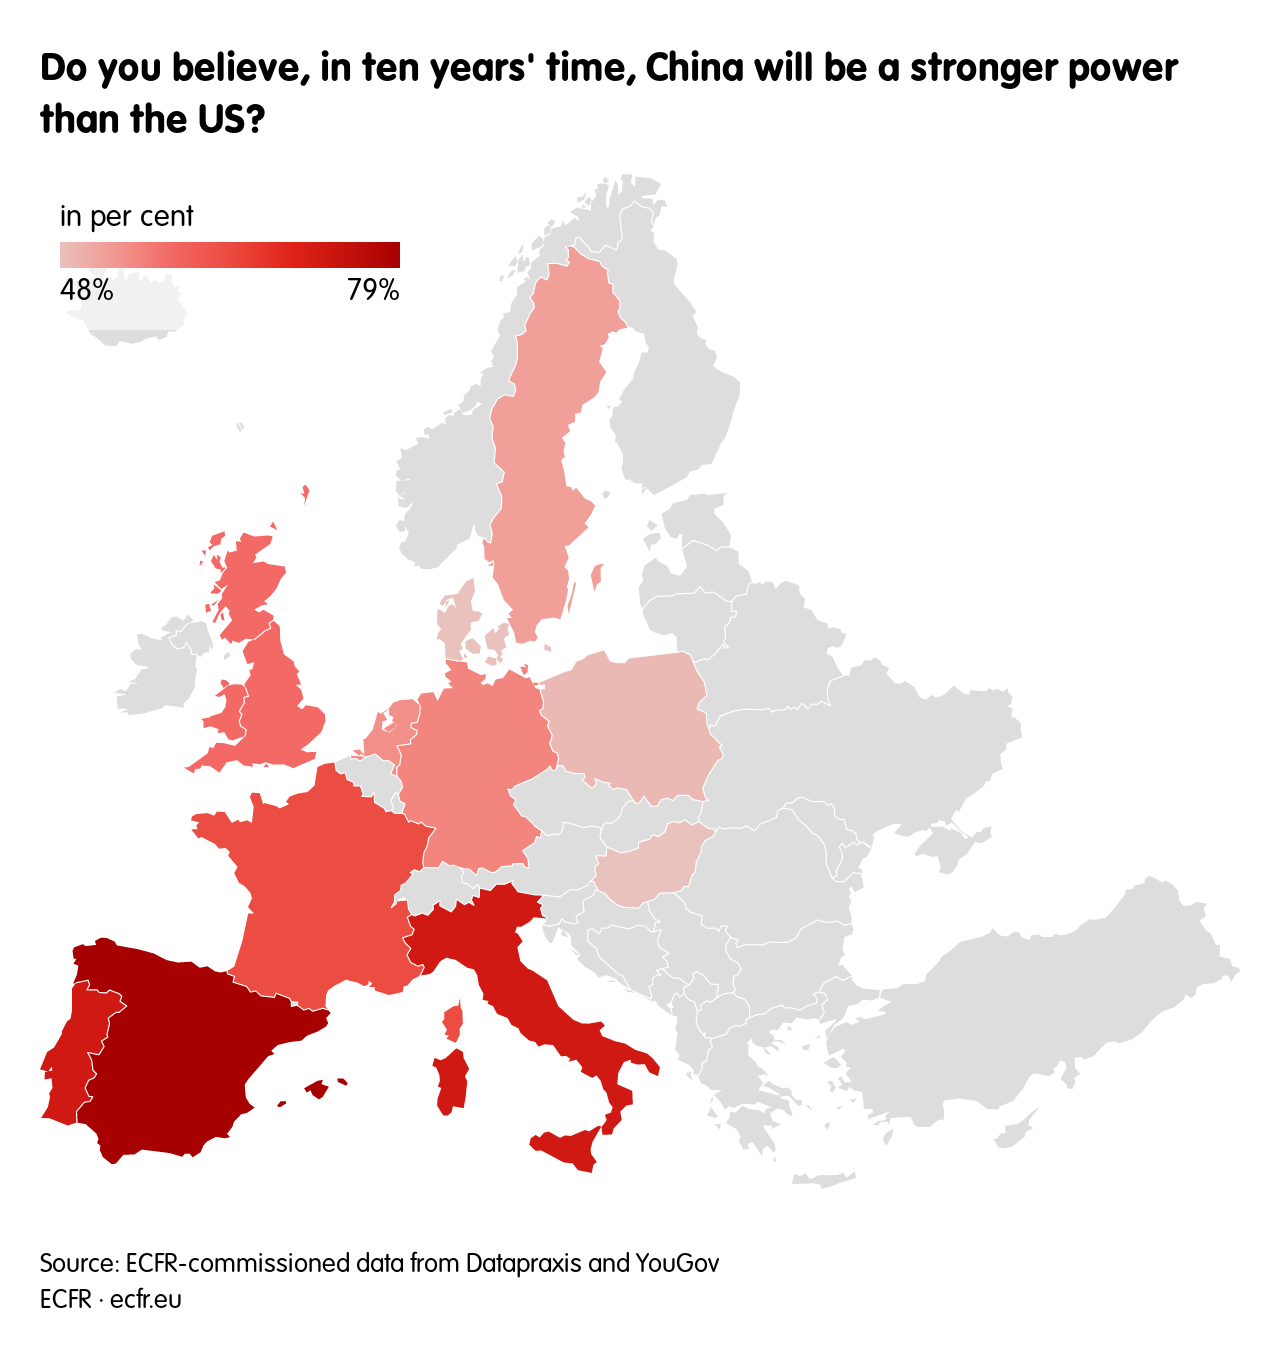 Do you believe, in ten years' time, China will be a stronger power than the US?